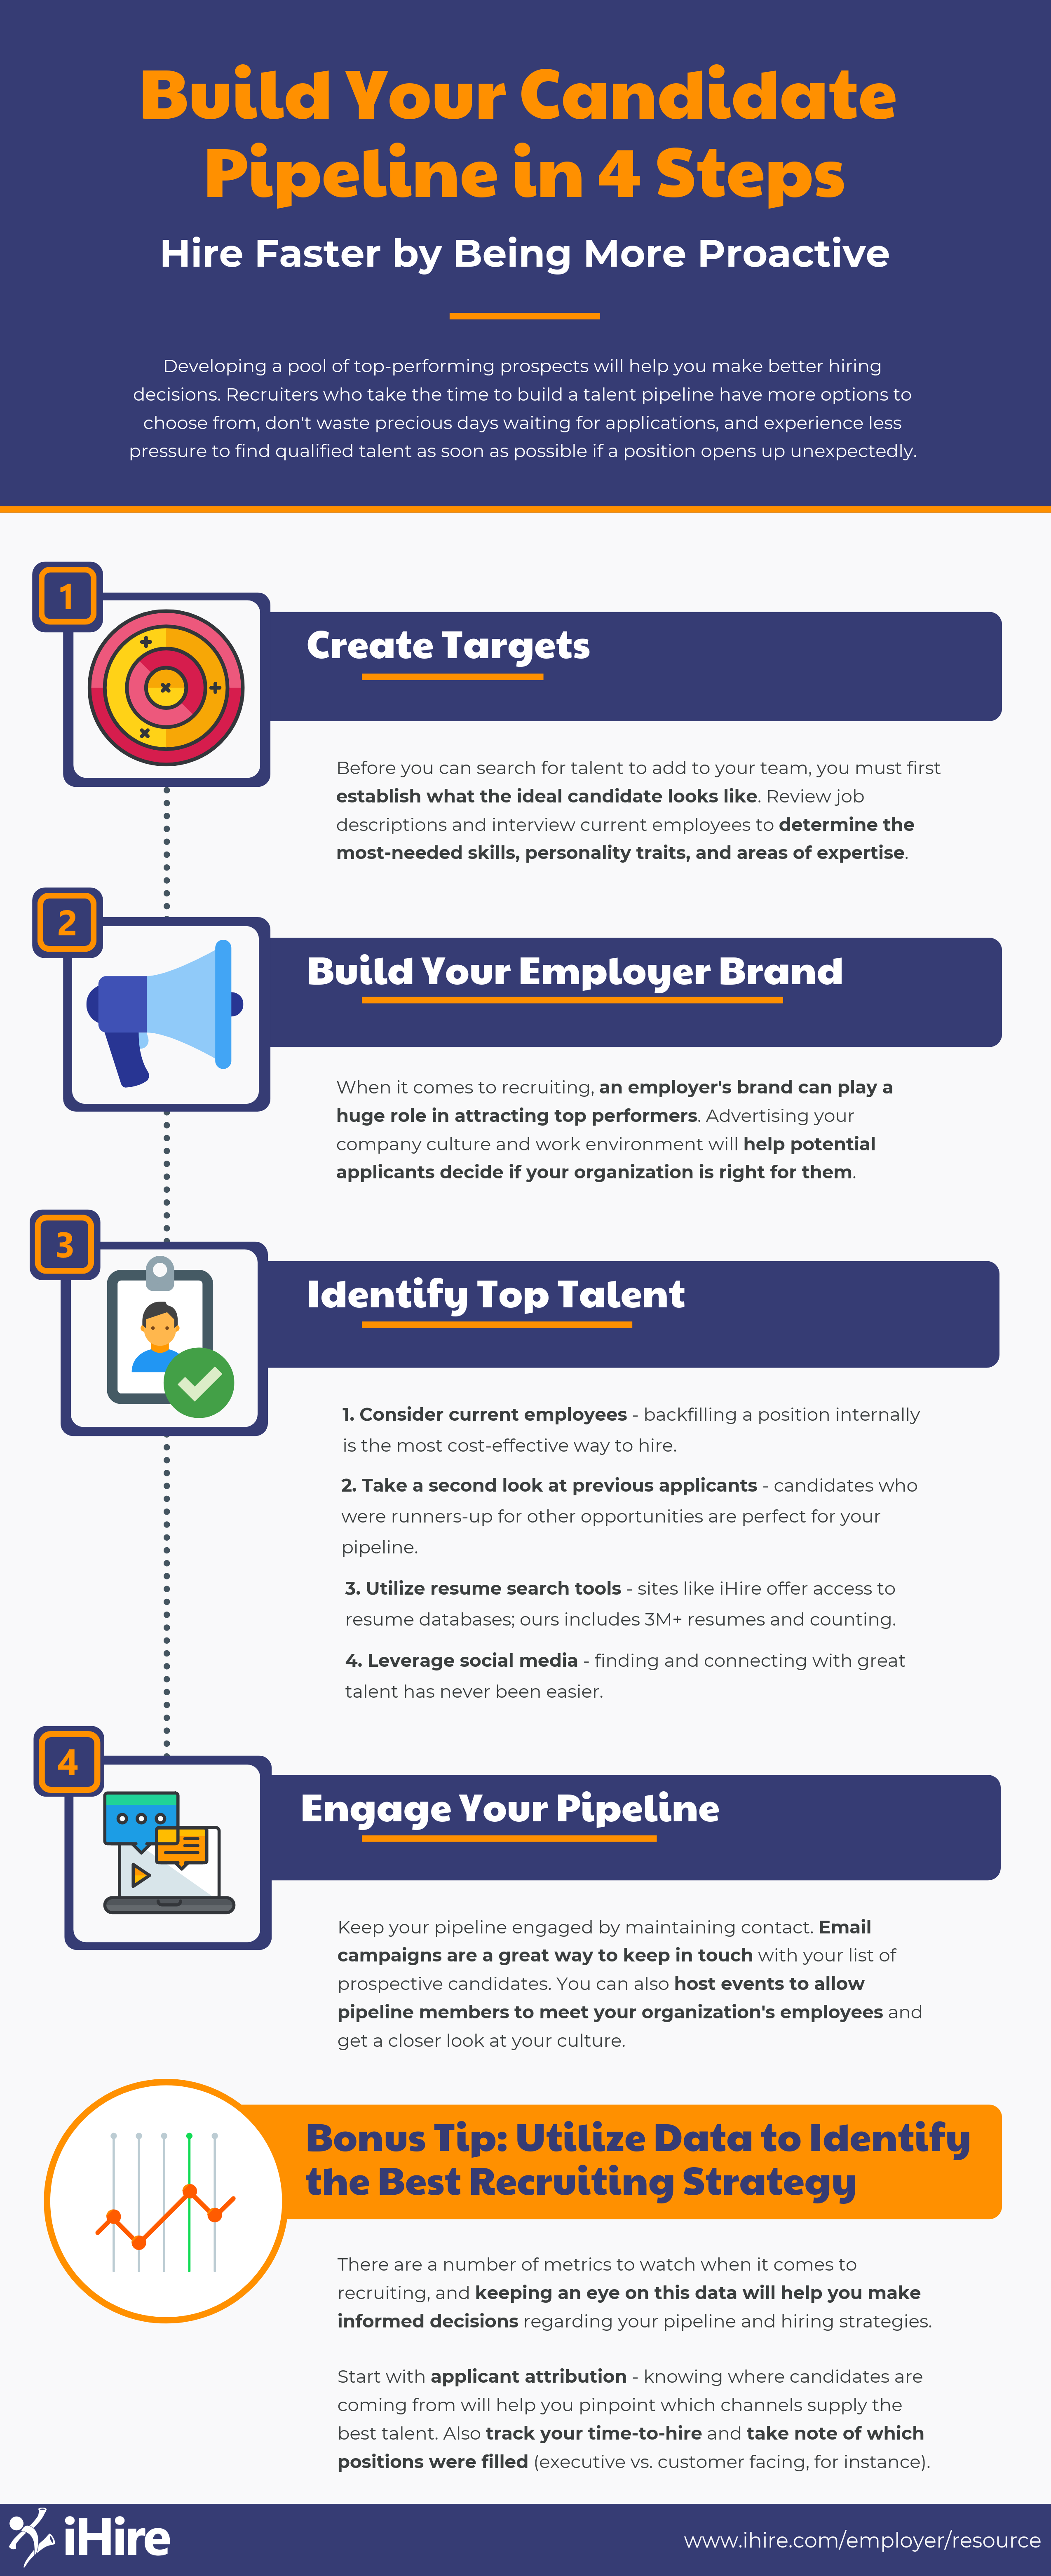 This infographic will help you learn how to build a candidate pipeline.